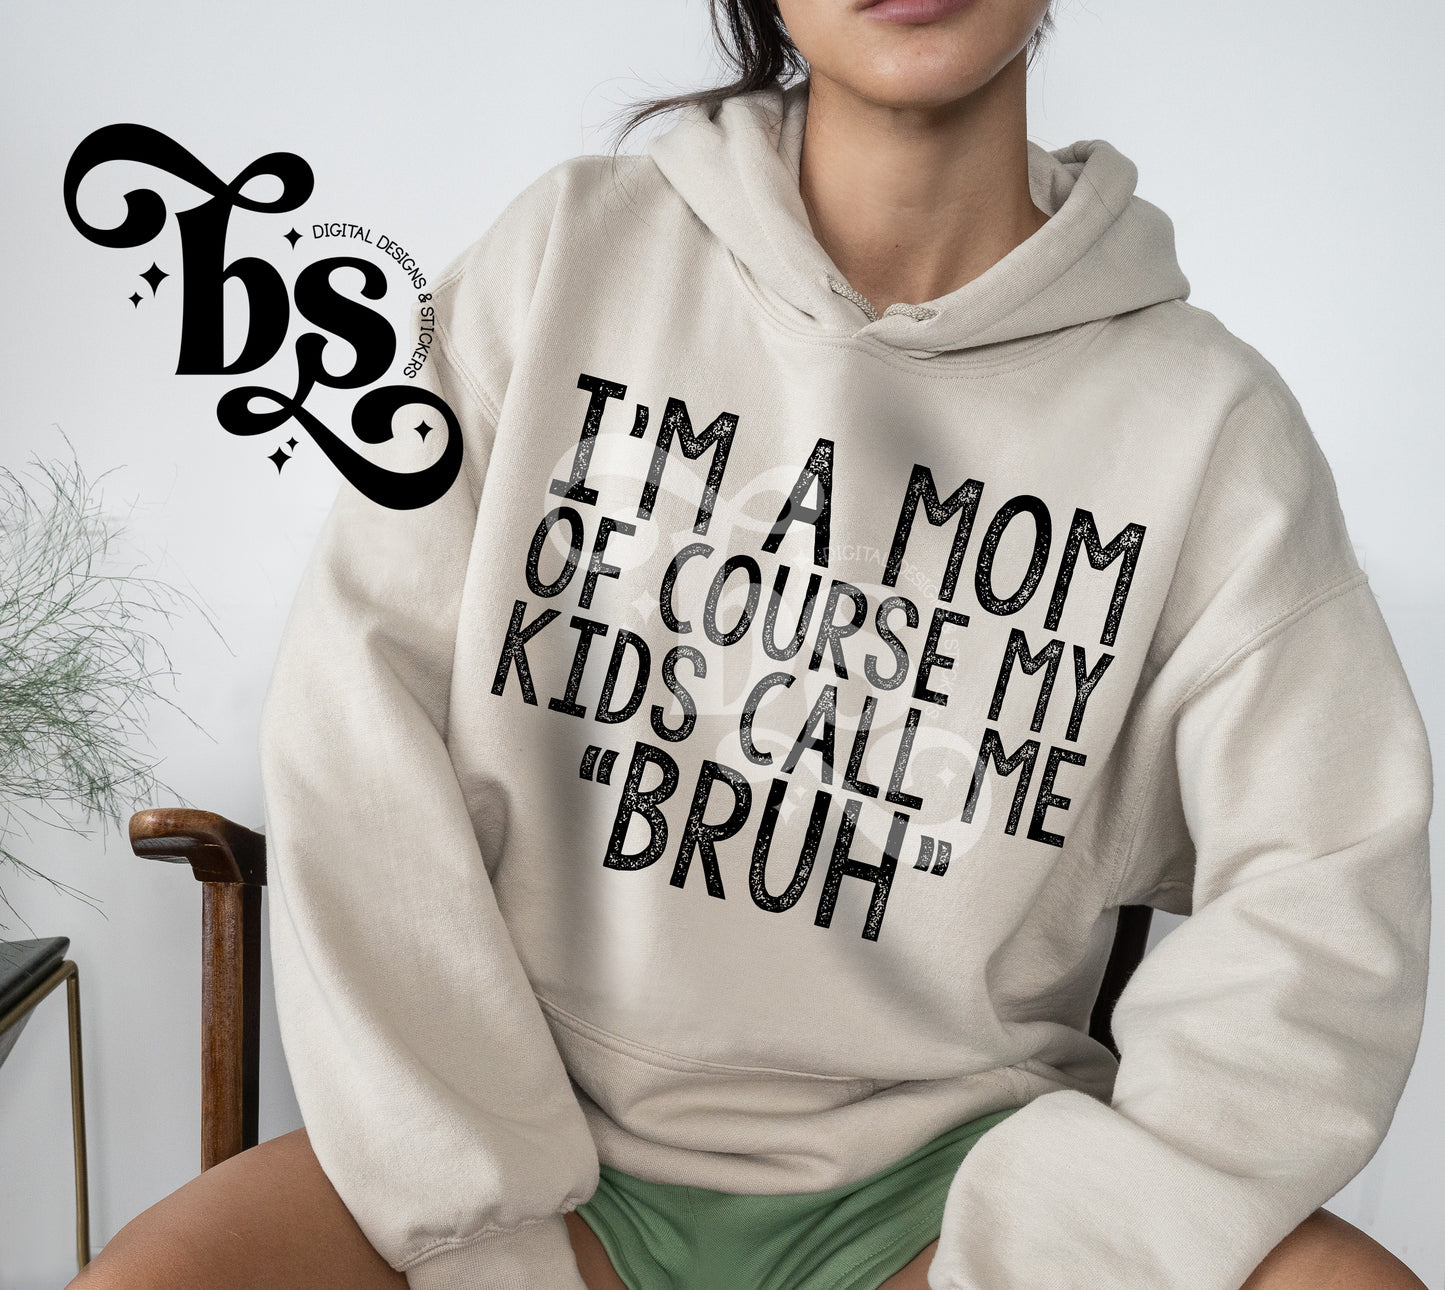 I’m a Mom of course my kids call me “bruh”